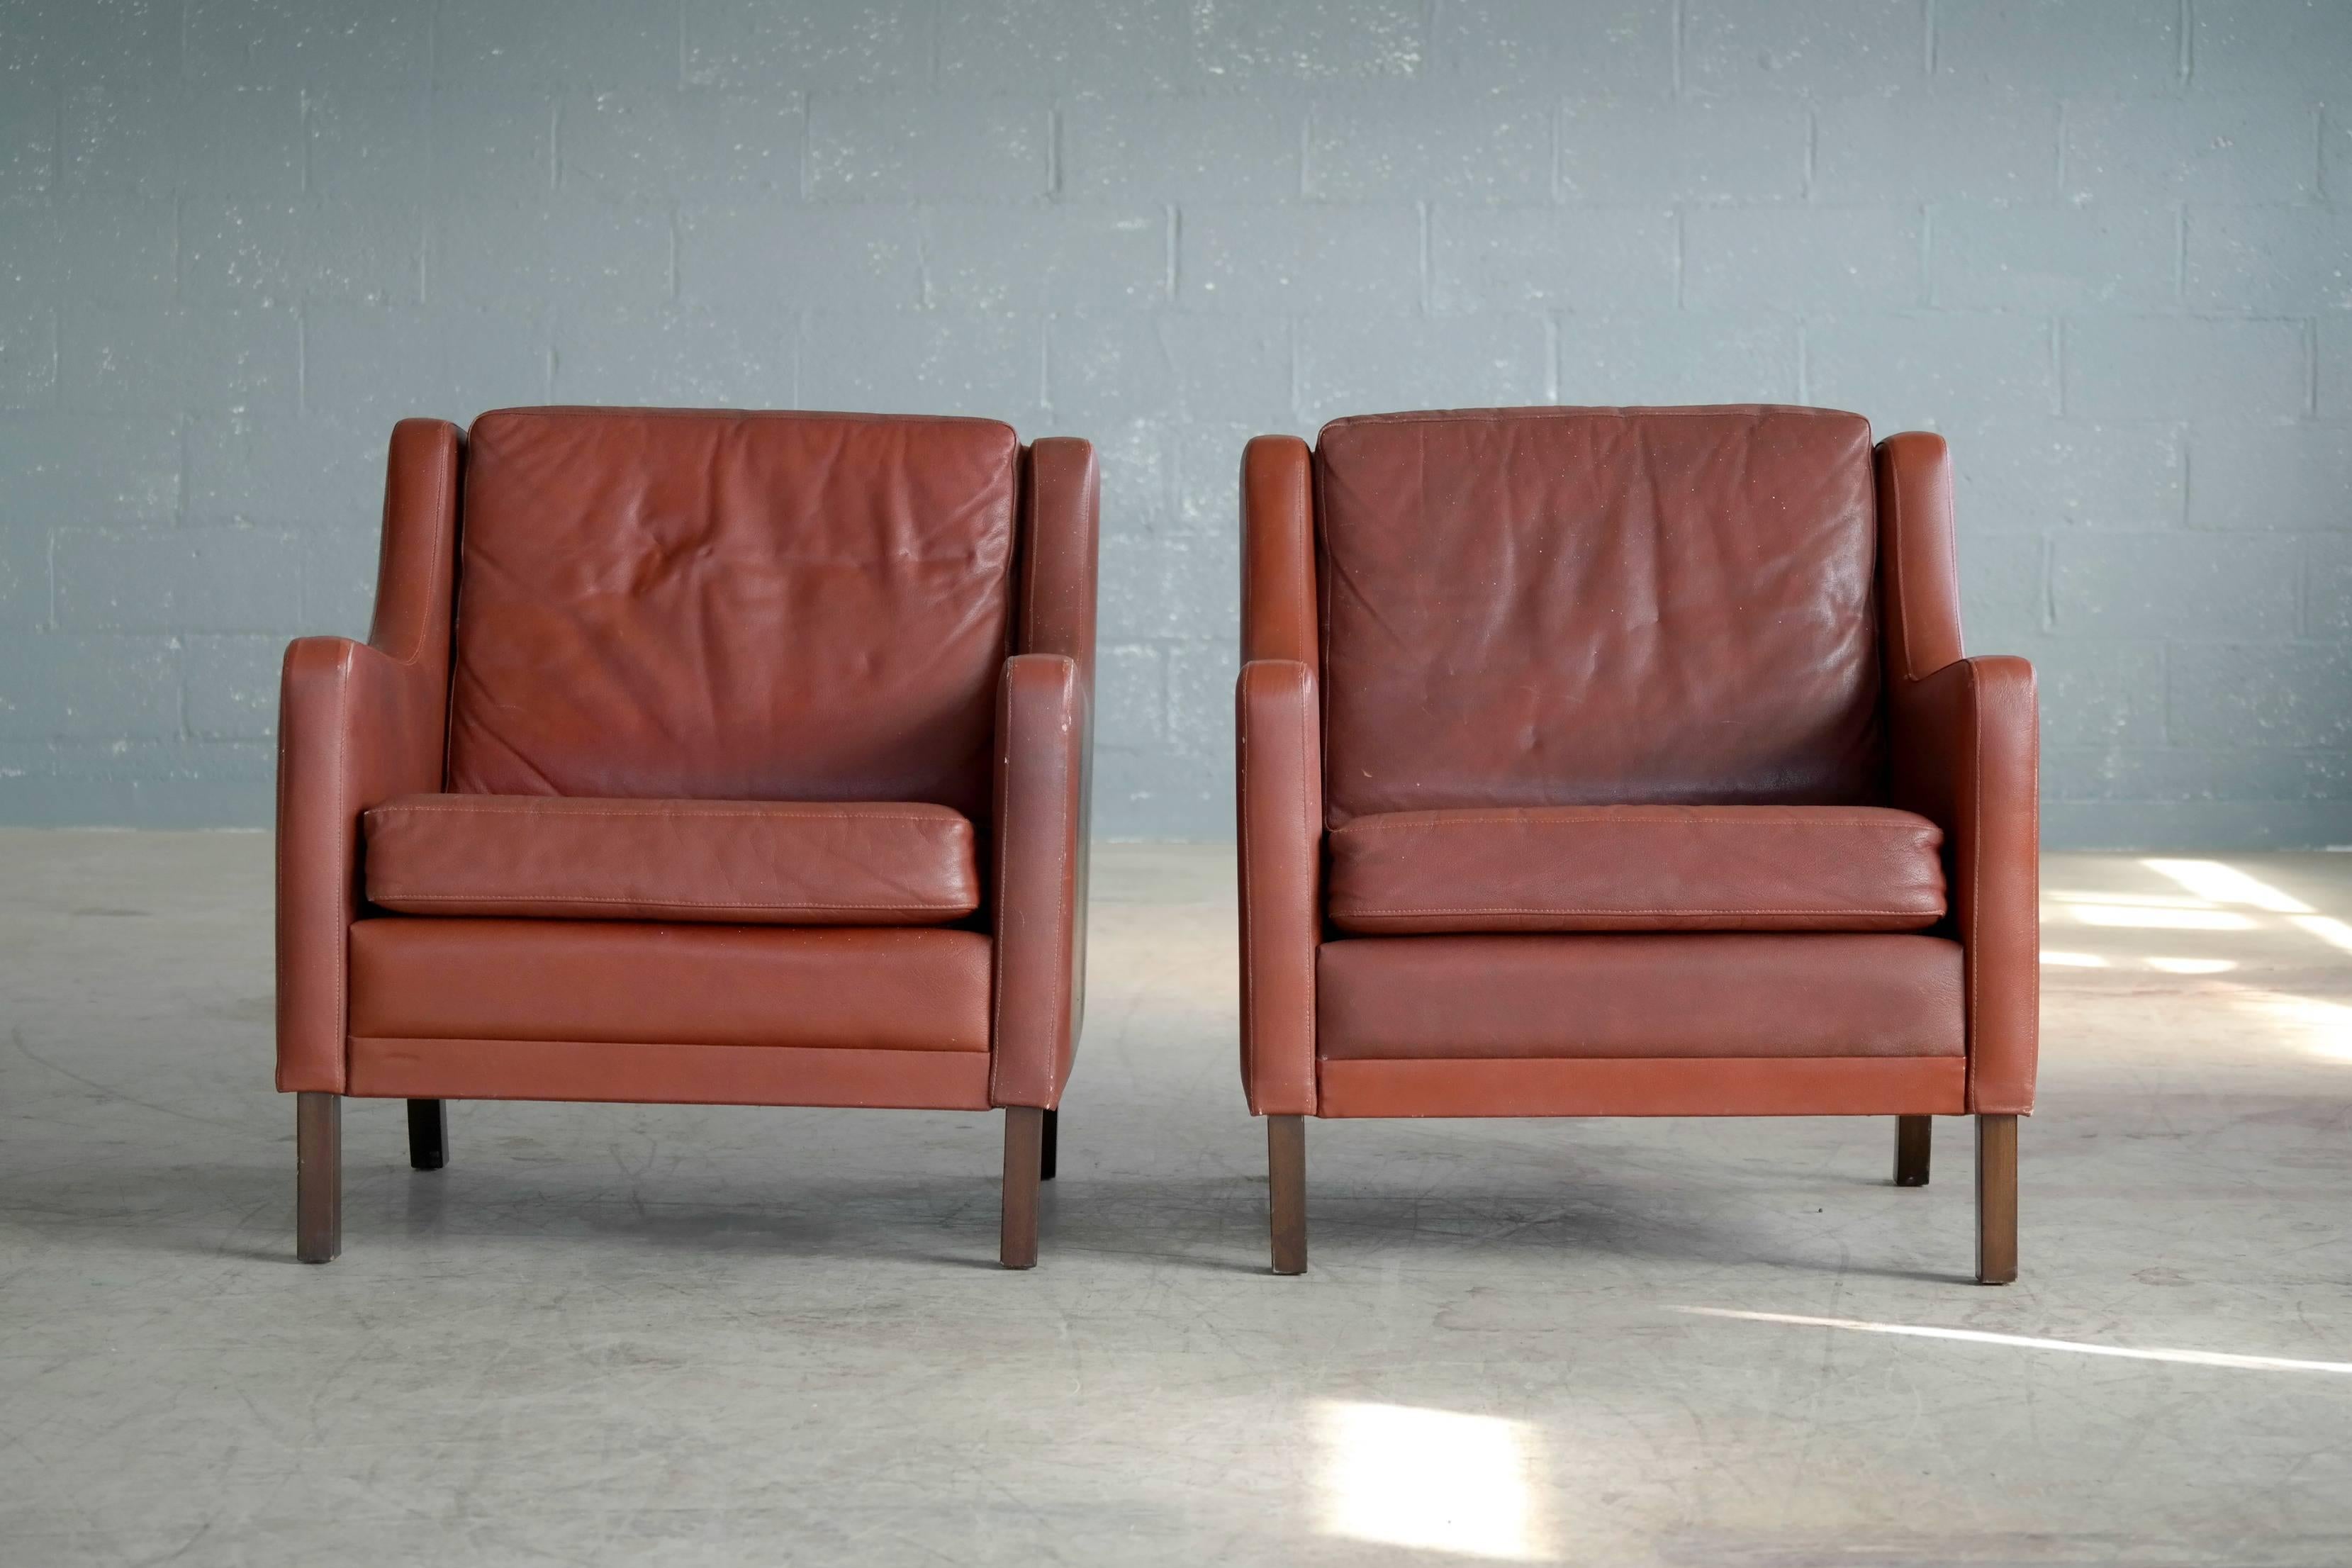 Mid-20th Century Pair of Danish Børge Mogensen Style Lounge Chairs in Red Brown Leather